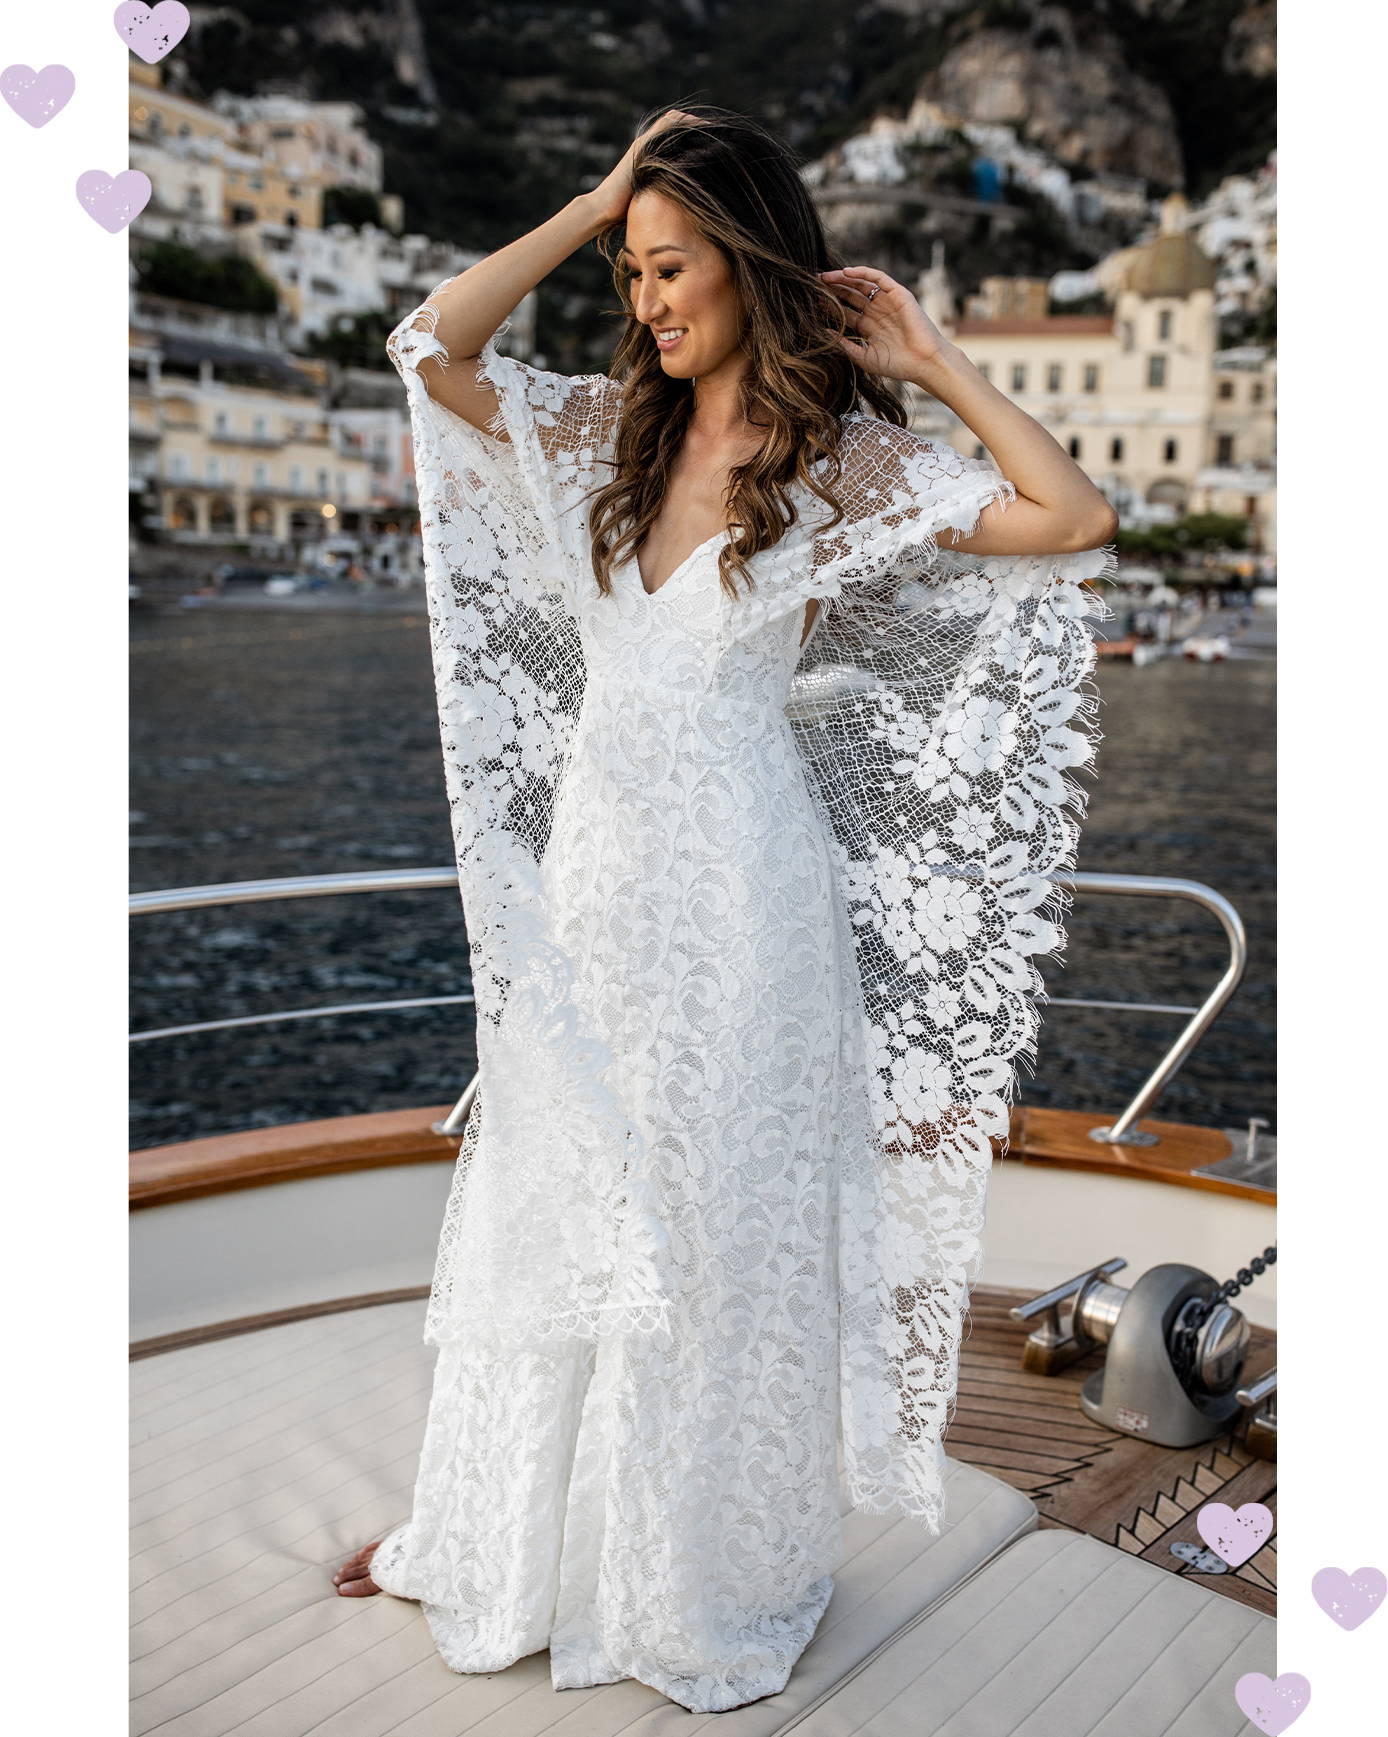 Grace Loves Lace bride wearing the Verdelle 2.0 wedding dress on the front of a yacht in the Amalfi Coast